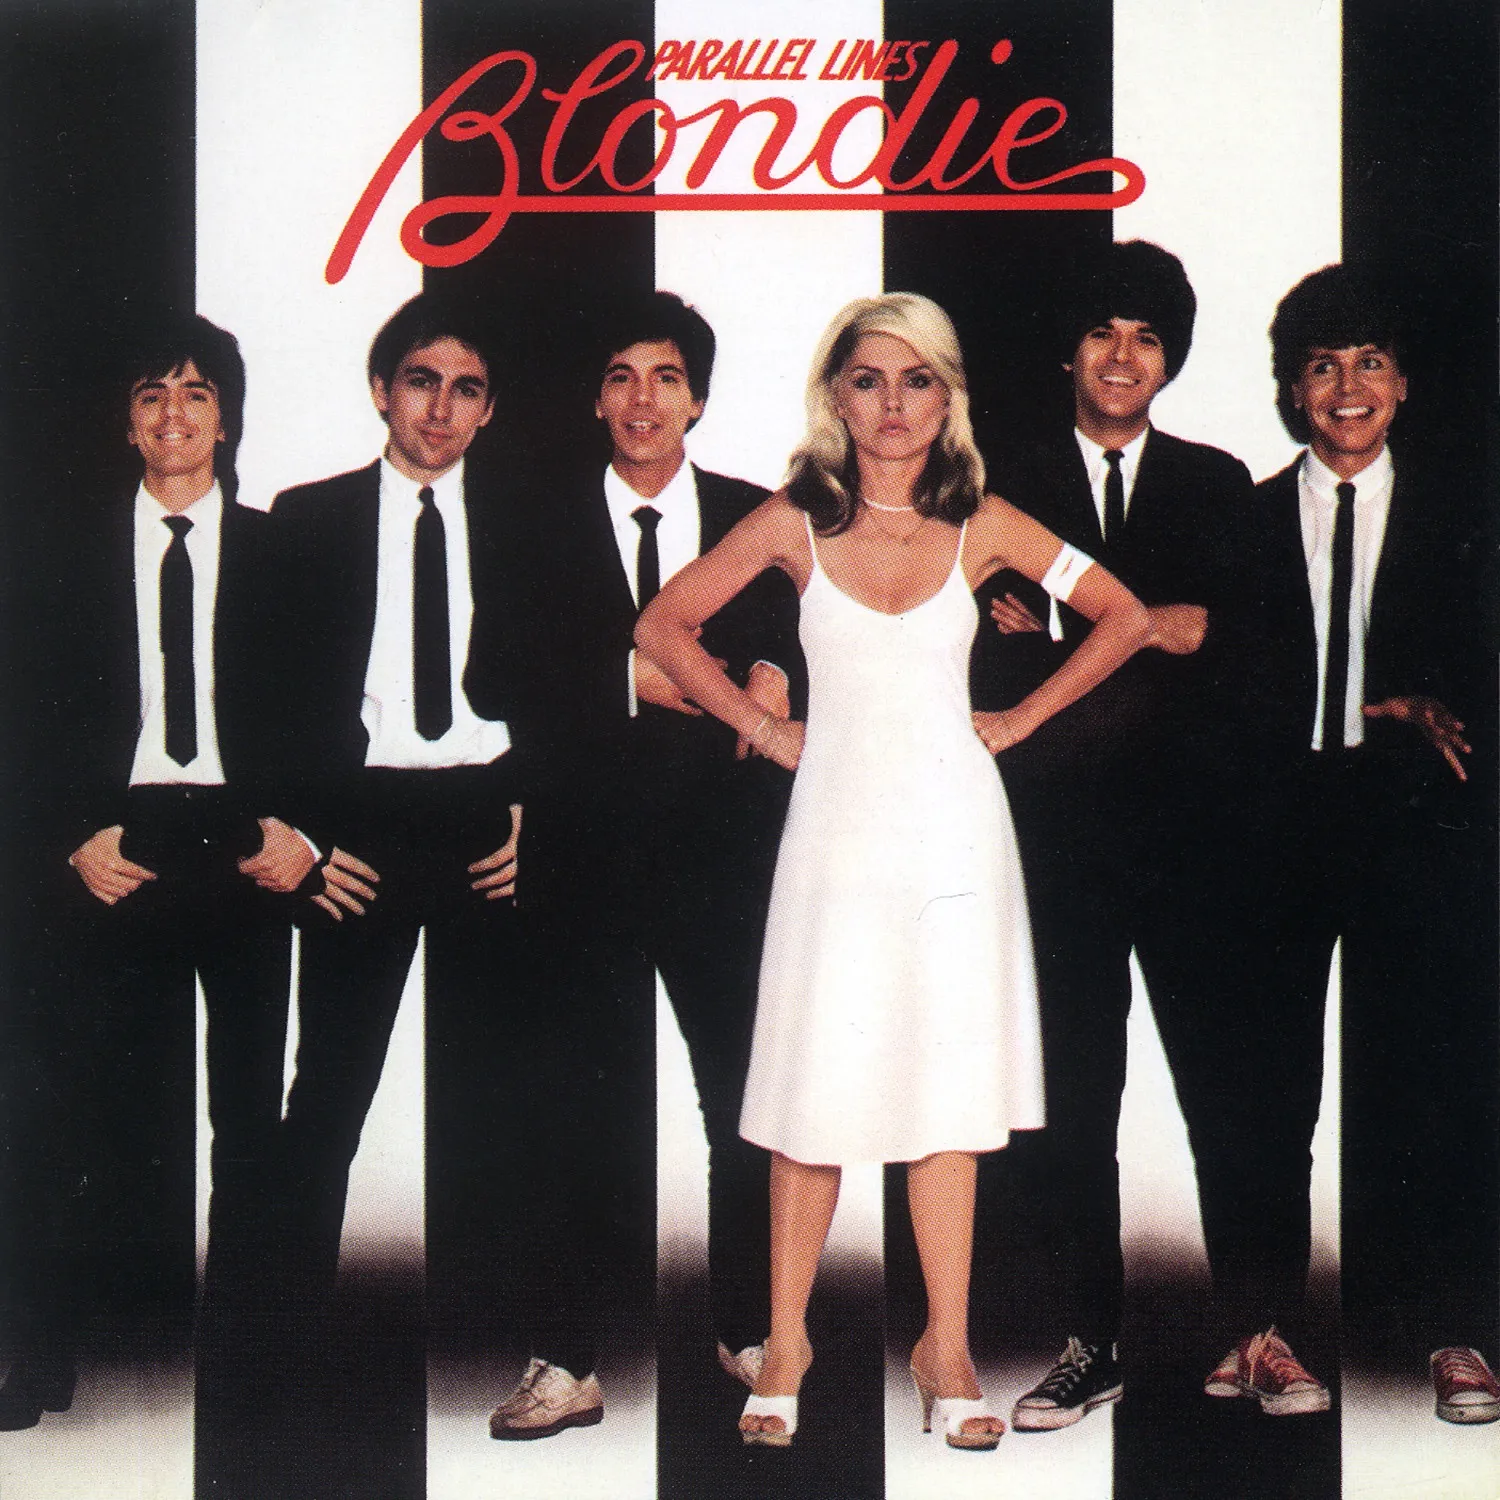 <strong>Blondie - Parallel Lines</strong> (Vinyl LP)